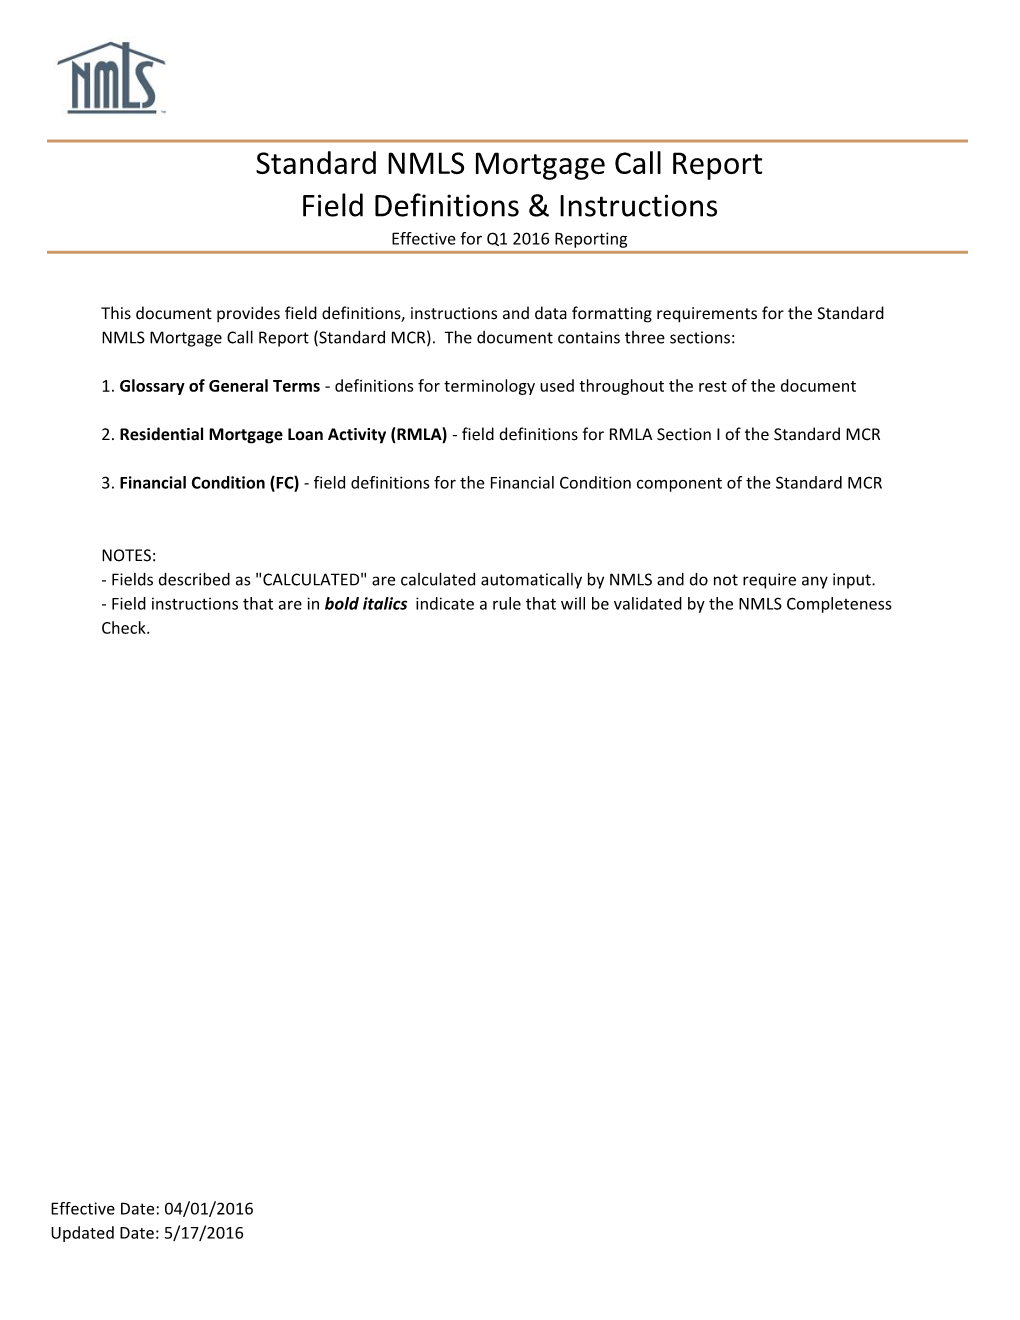 Standard NMLS Mortgage Call Report Field Definitions & Instructions